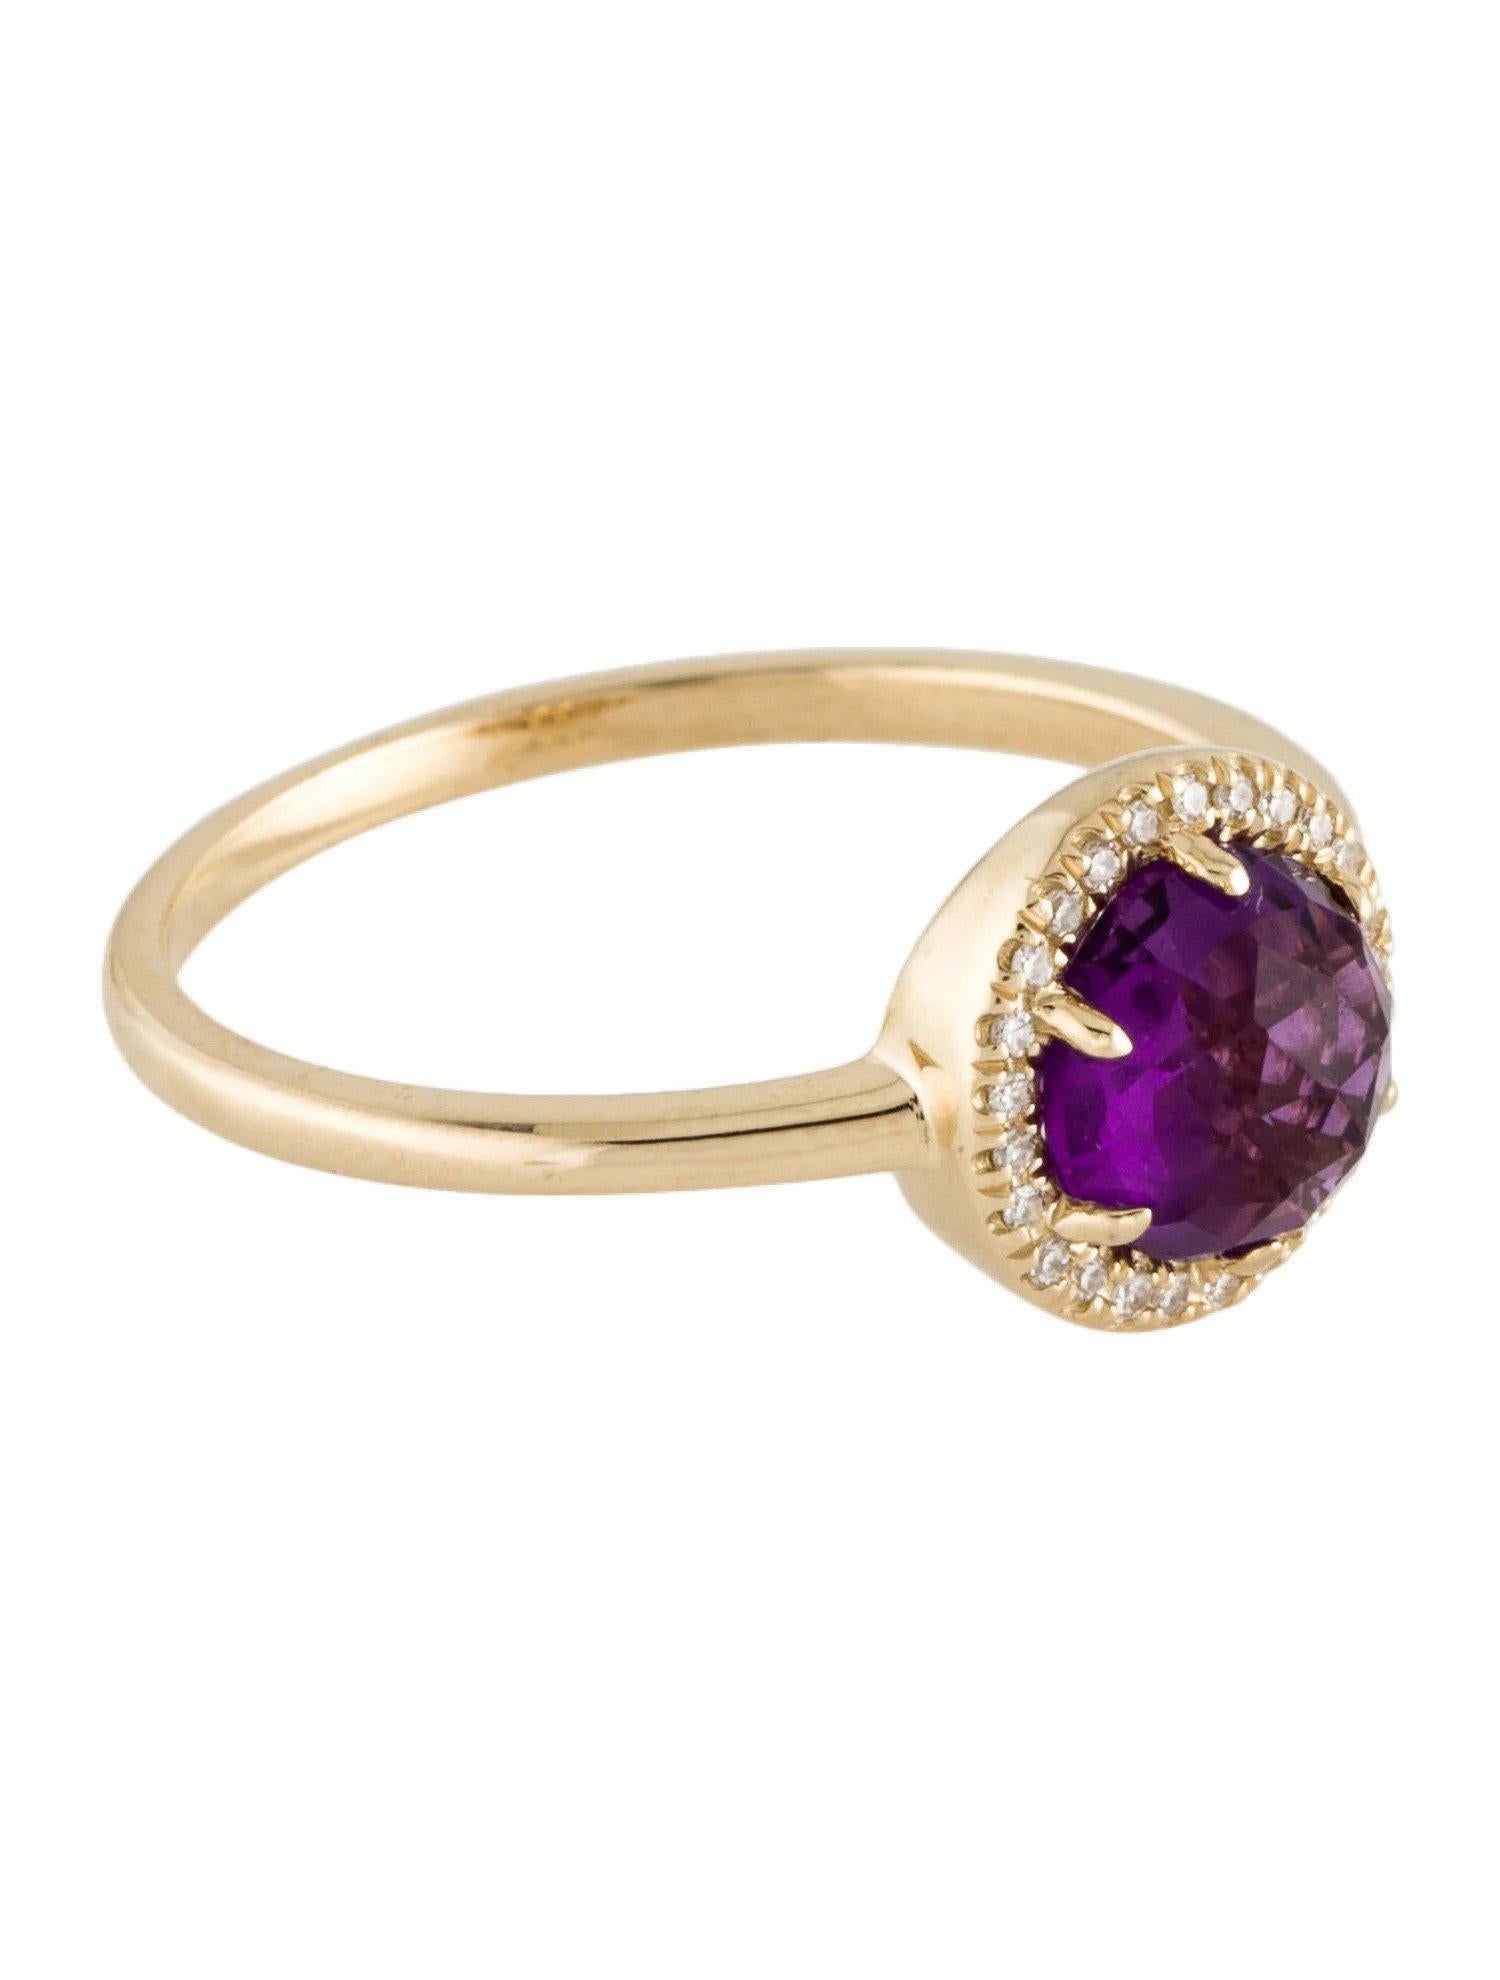 Round Cut 0.93 Carat Round Amethyst & Diamond Yellow Gold Ring For Sale